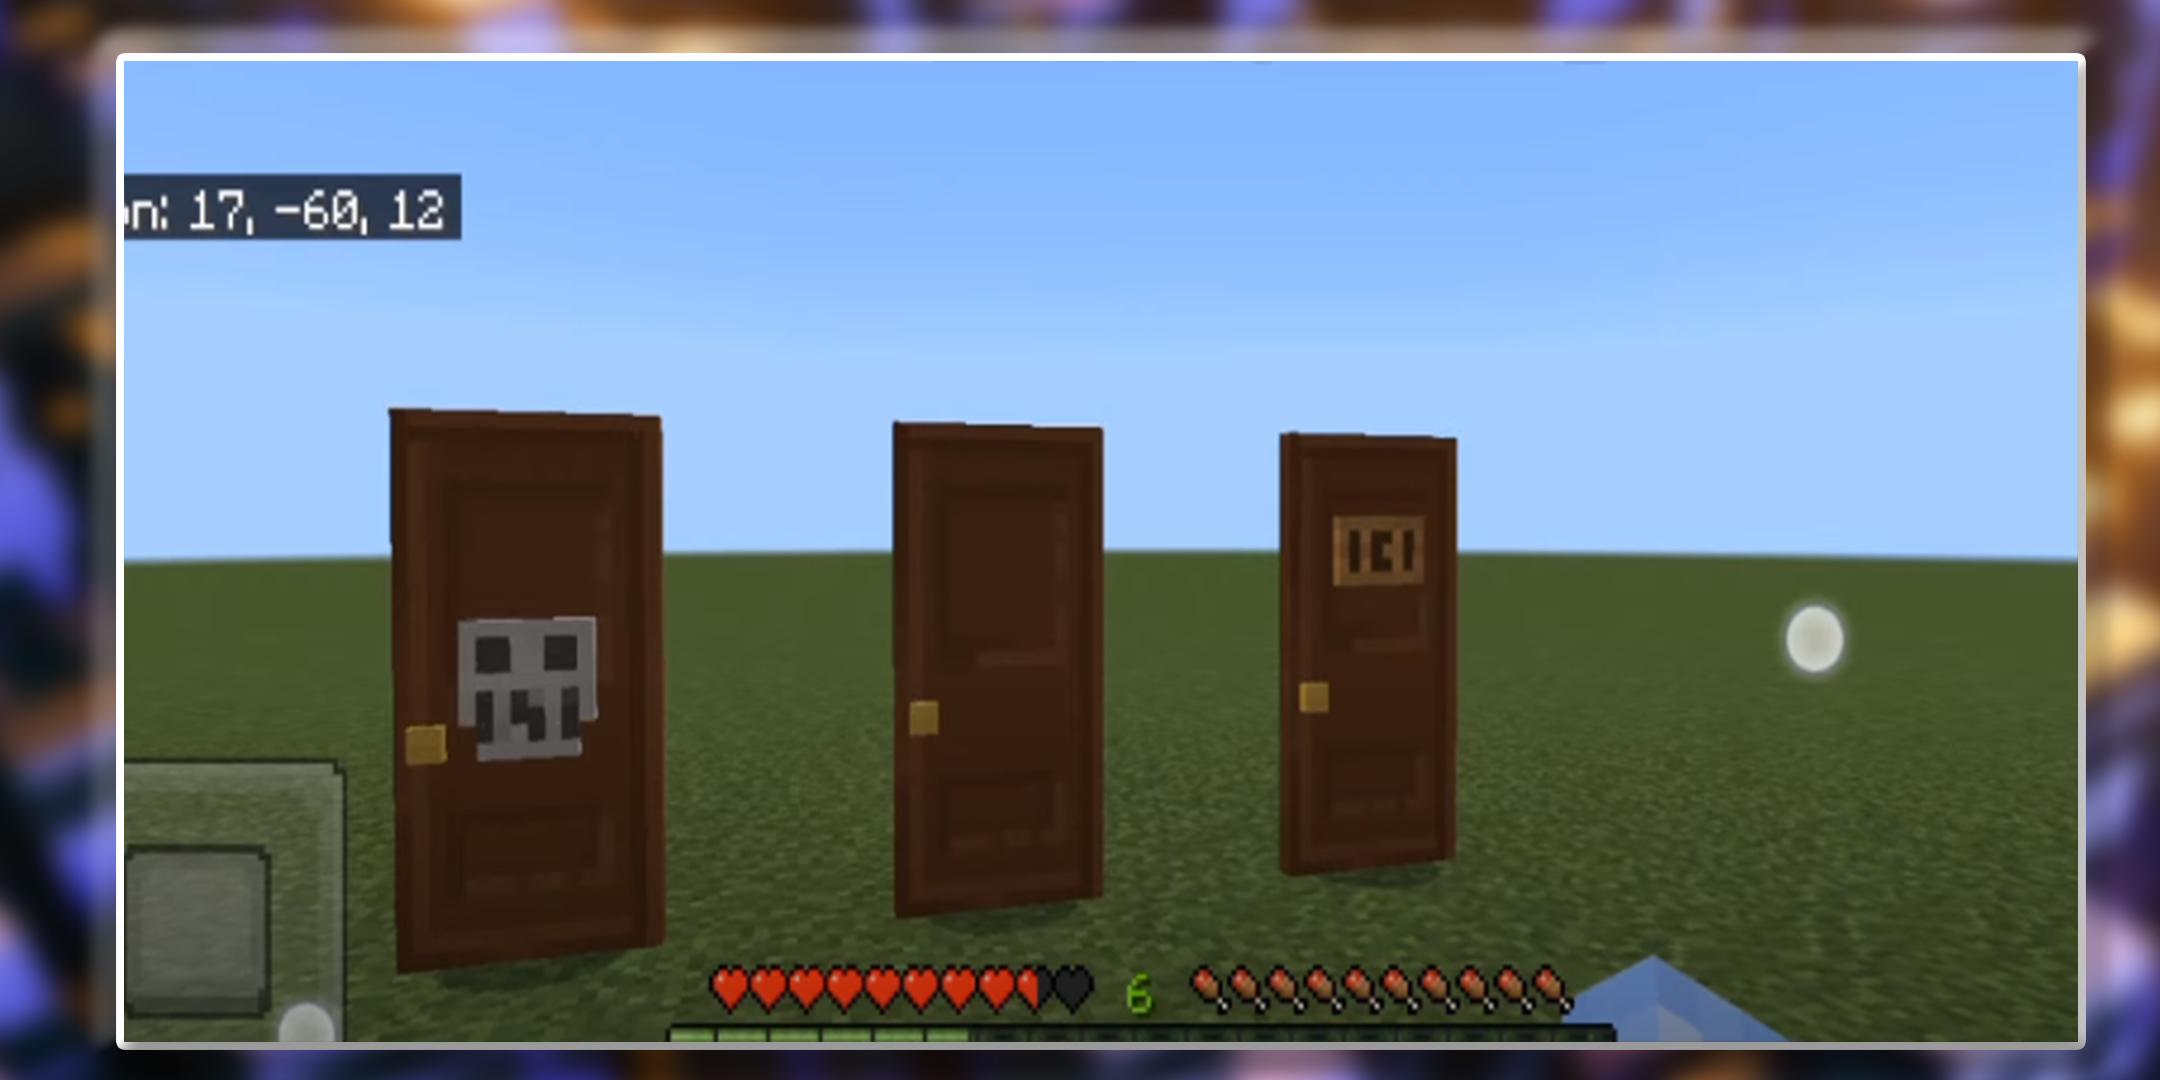 Download roblox doors mod for minecraft android on PC